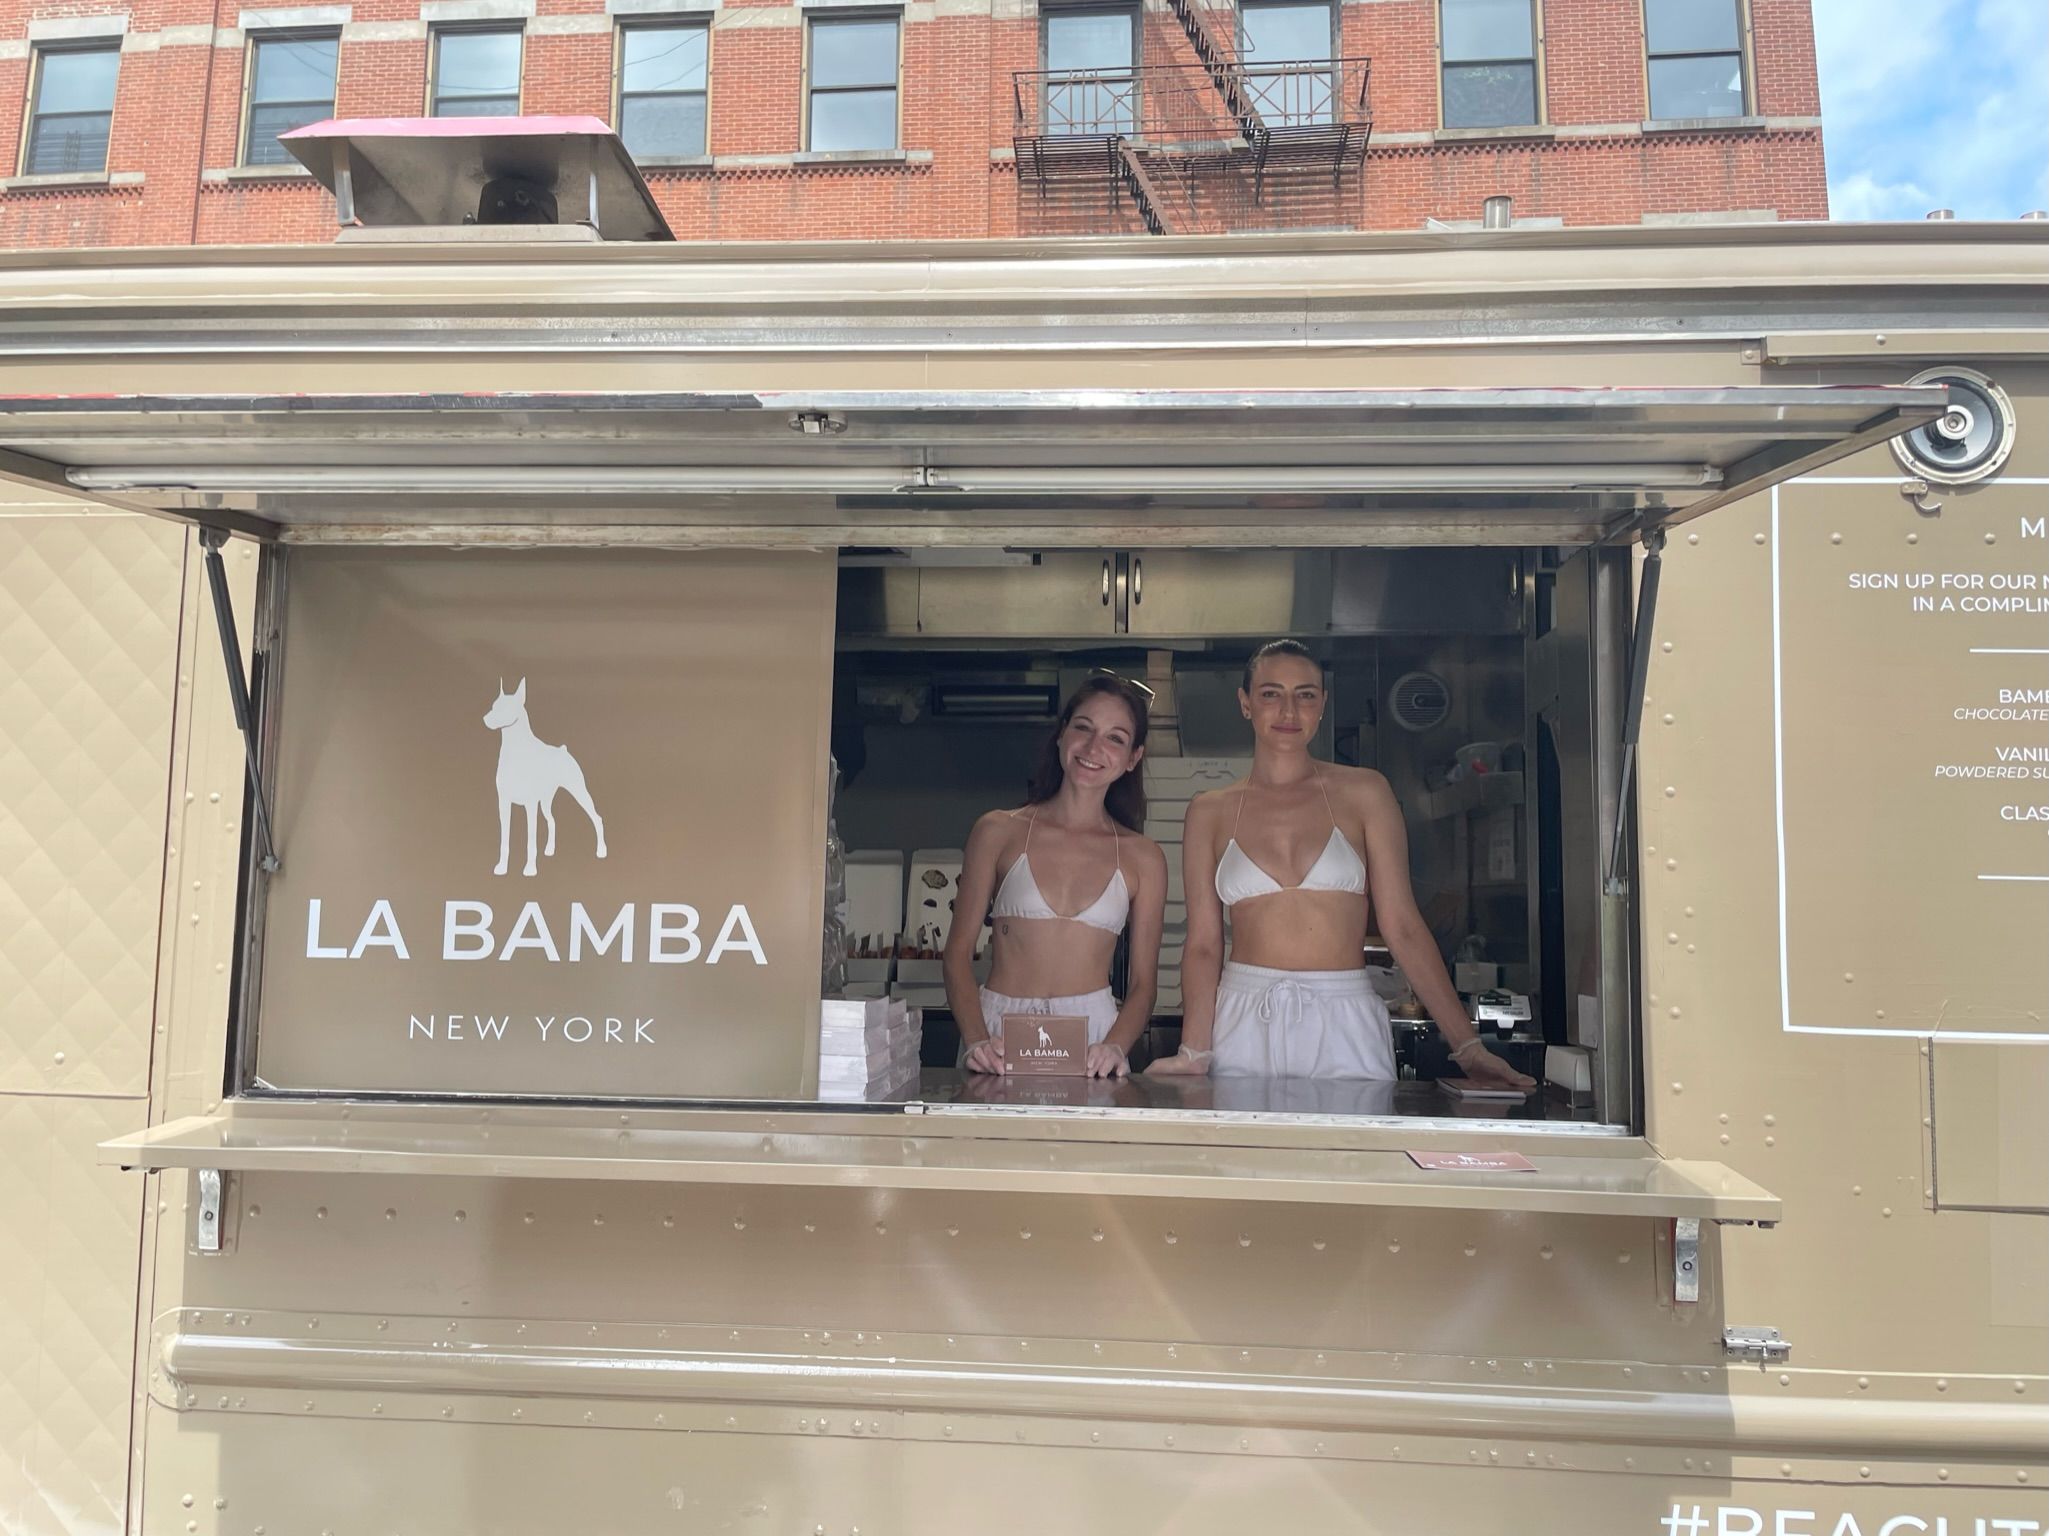 La Bamba launch from branded food truck